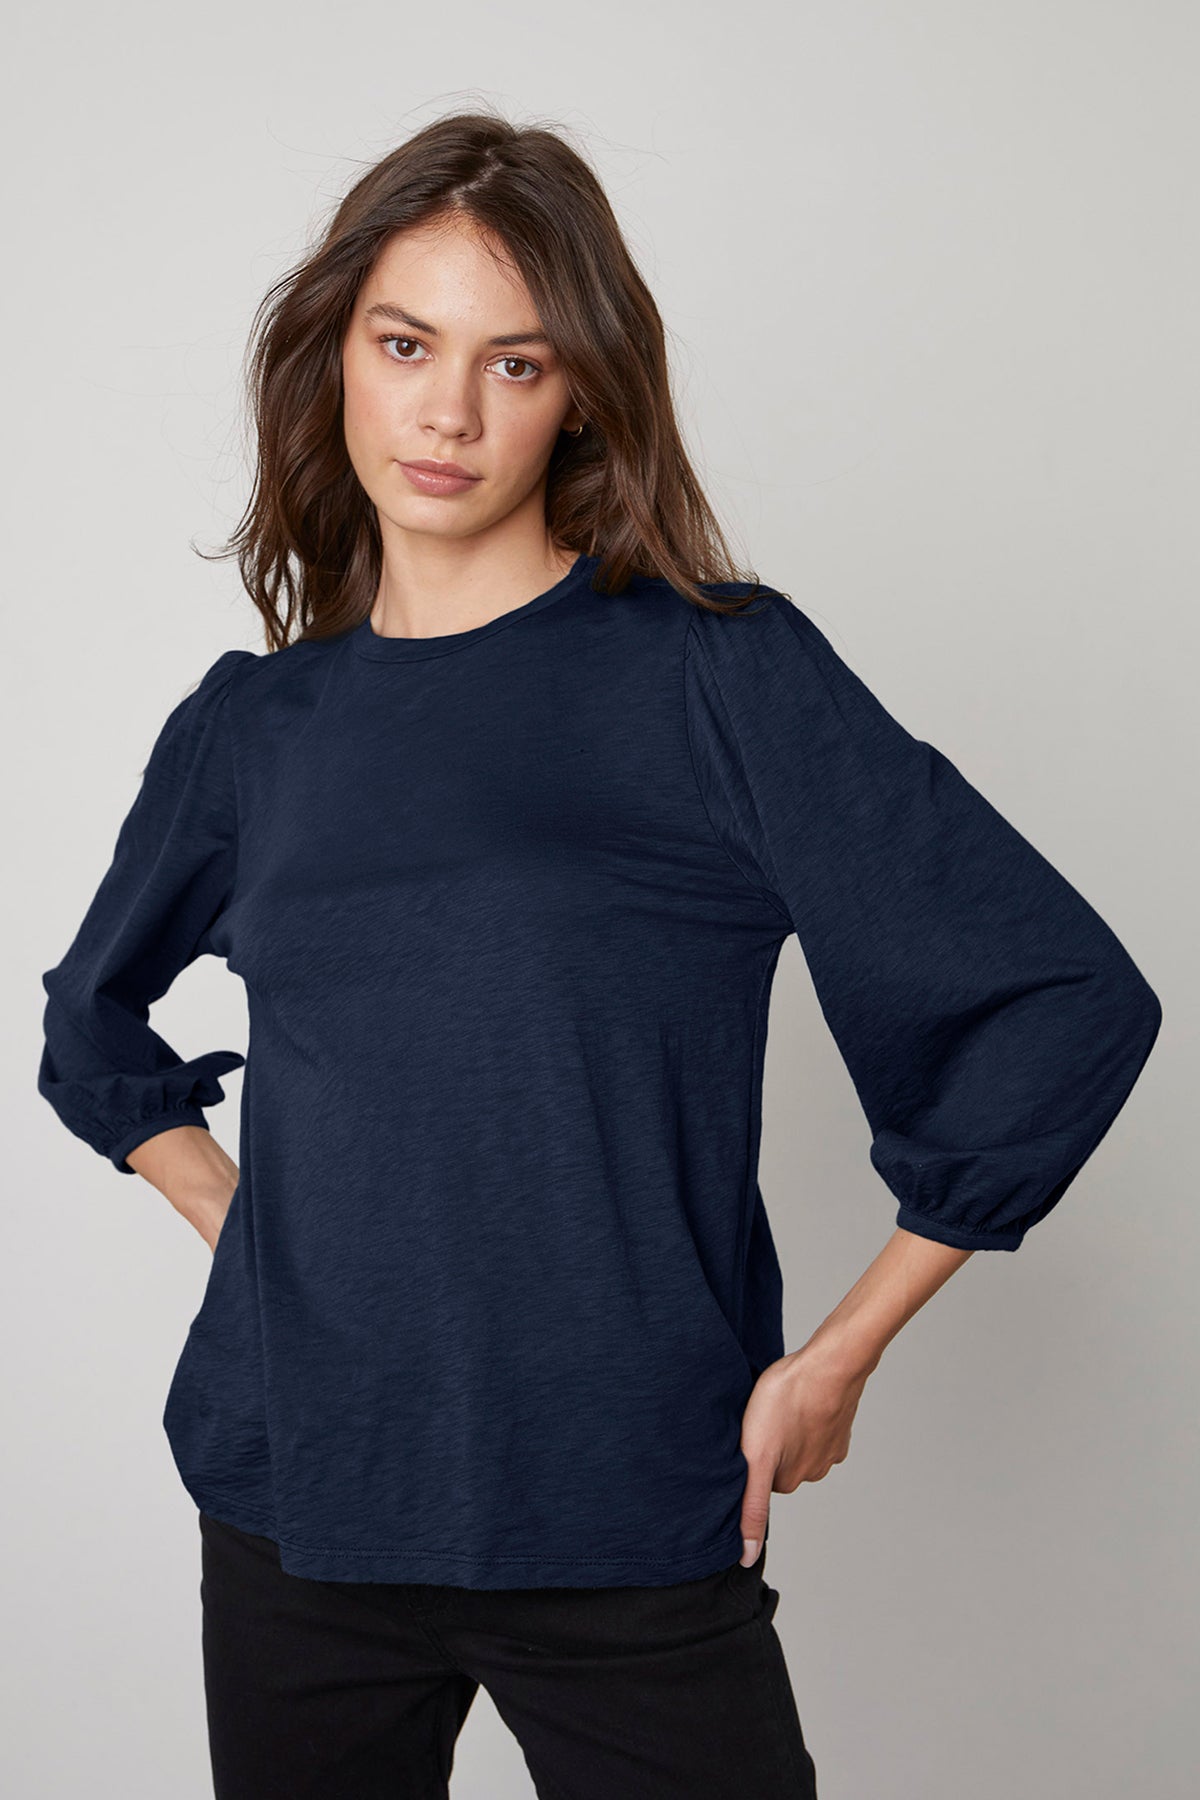 The model is wearing a navy ANETTE PUFF SLEEVE TEE by Velvet by Graham & Spencer.-26799865790657